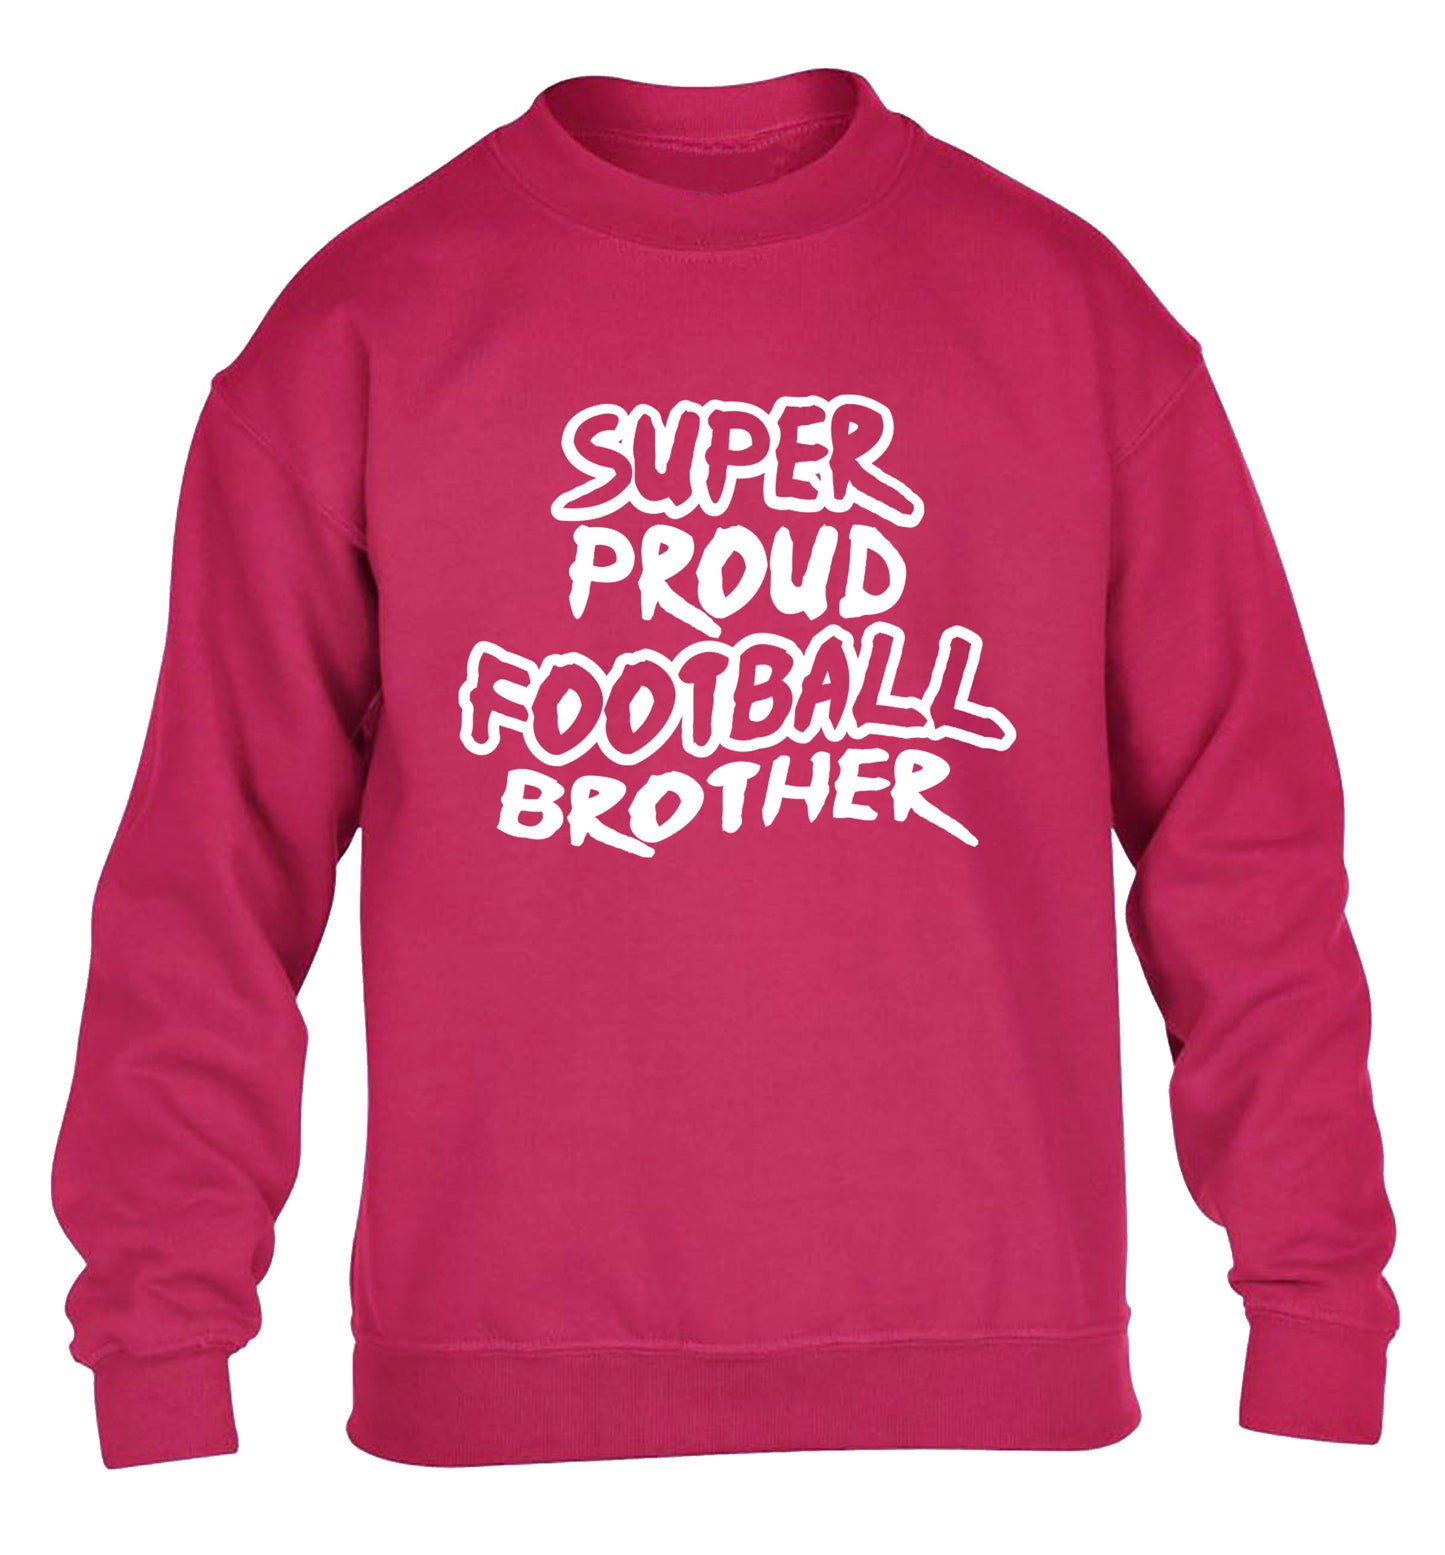 Super proud football brother children's pink sweater 12-14 Years